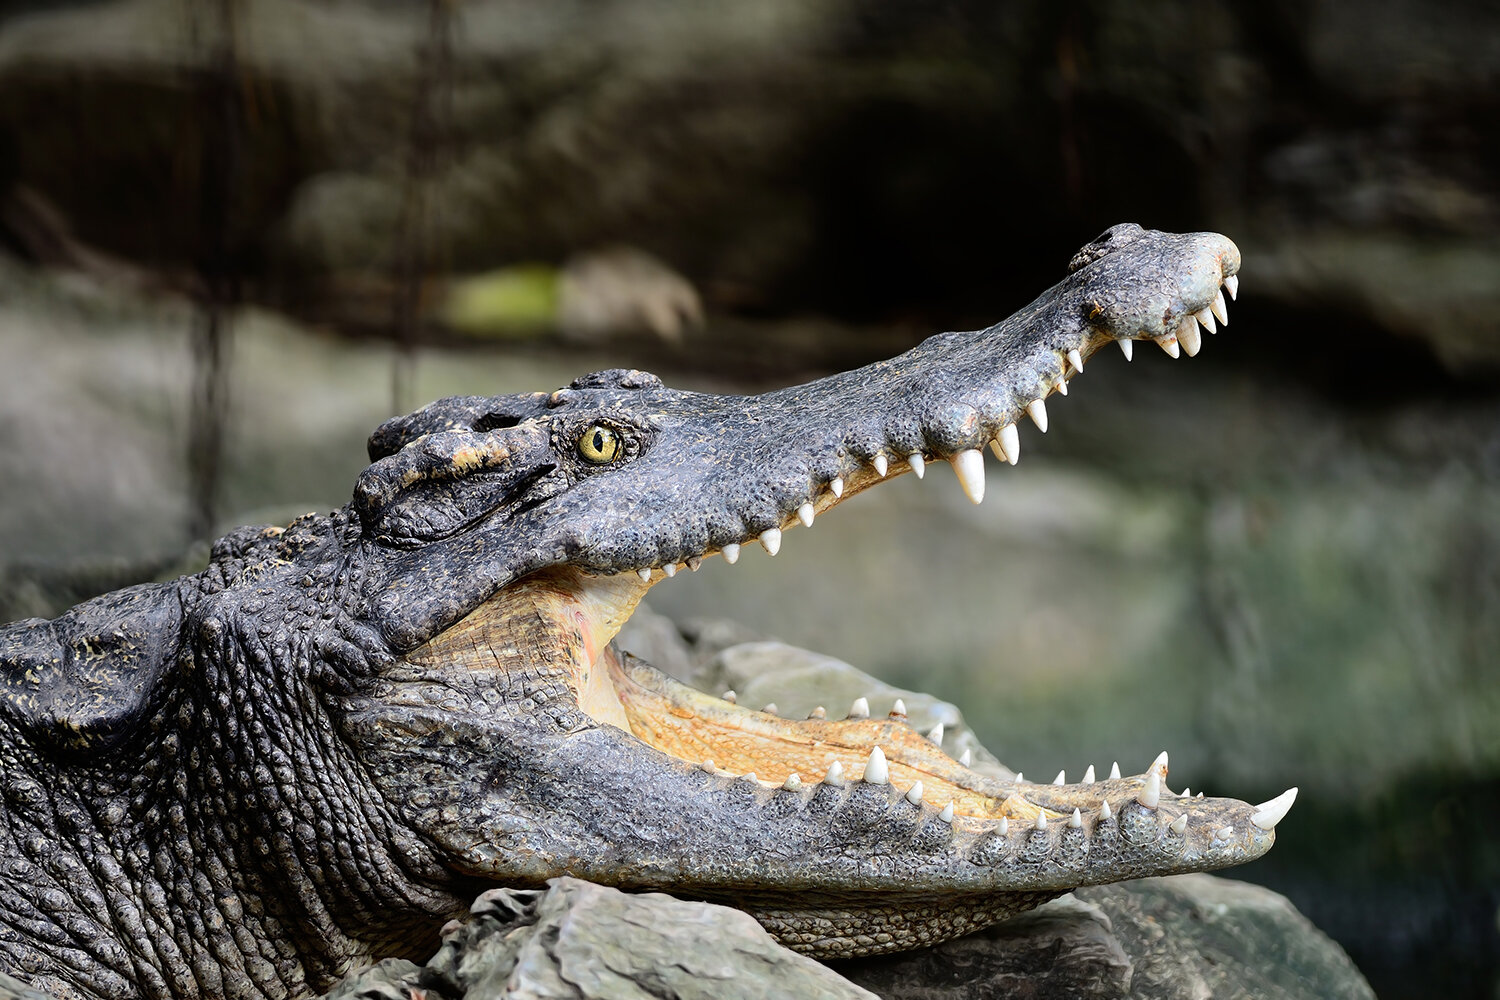 Giant dwarf crocodile species discovered that may have eaten human  ancestors 18 million years ago